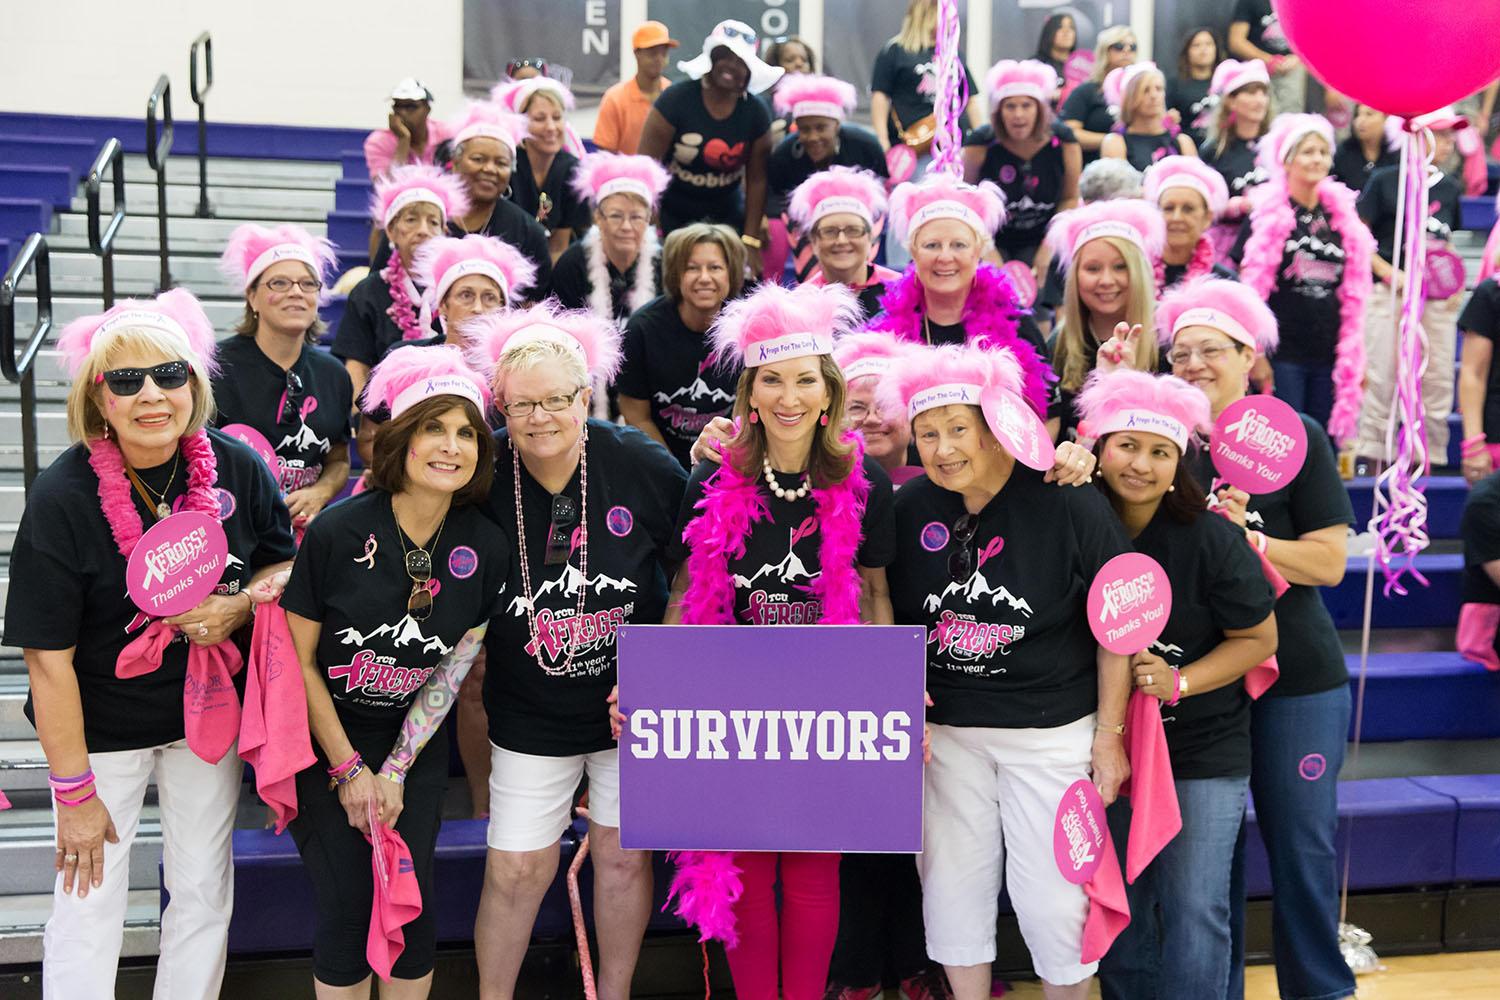 A+Frogs+for+the+Cure+halftime+celebration+extends+across+the+country+to+raise+awareness+about+breast+cancer.